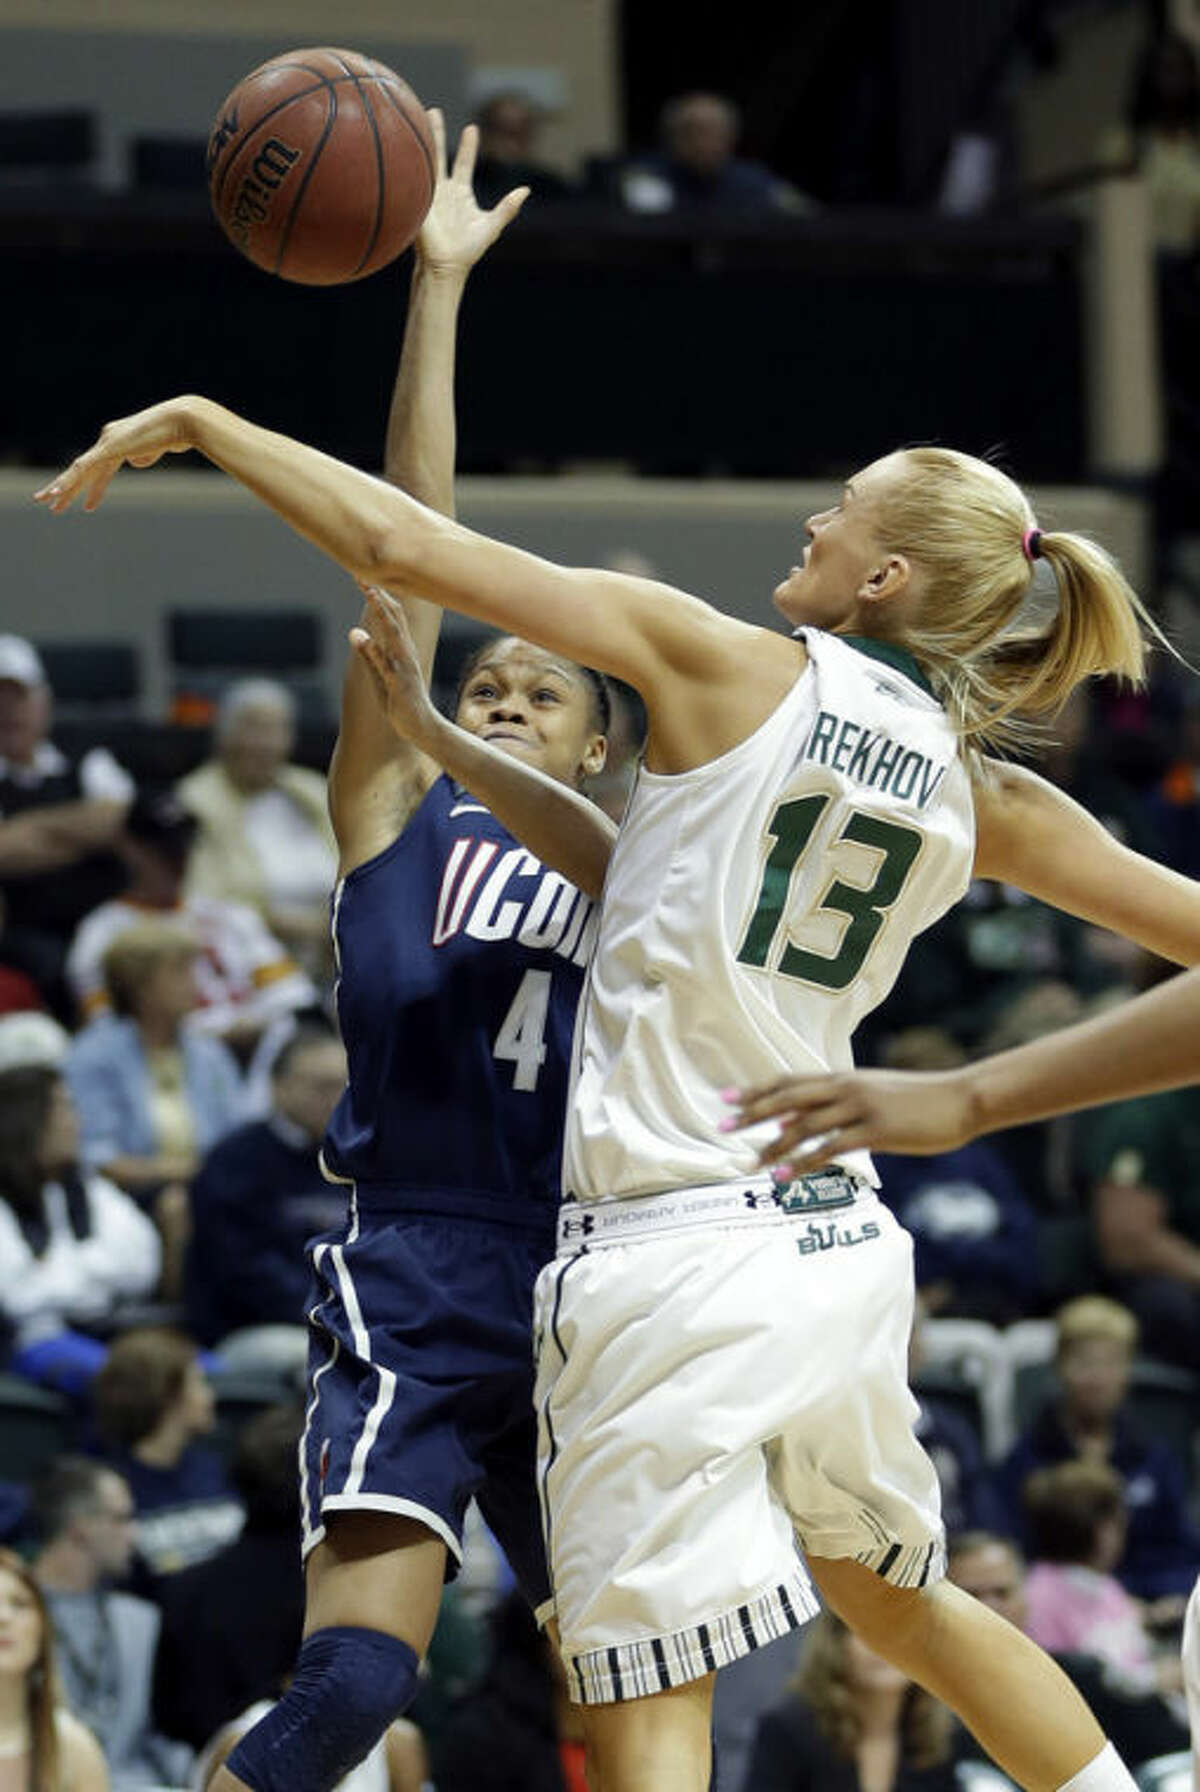 South Florida guard Inga Orekhova (13) blocks a shot by Connecticut guard Moriah Jefferson (4) during the first half of an NCAA college basketball game, Saturday, March 2, 2013, in Tampa, Fla. (AP Photo/Chris O'Meara)